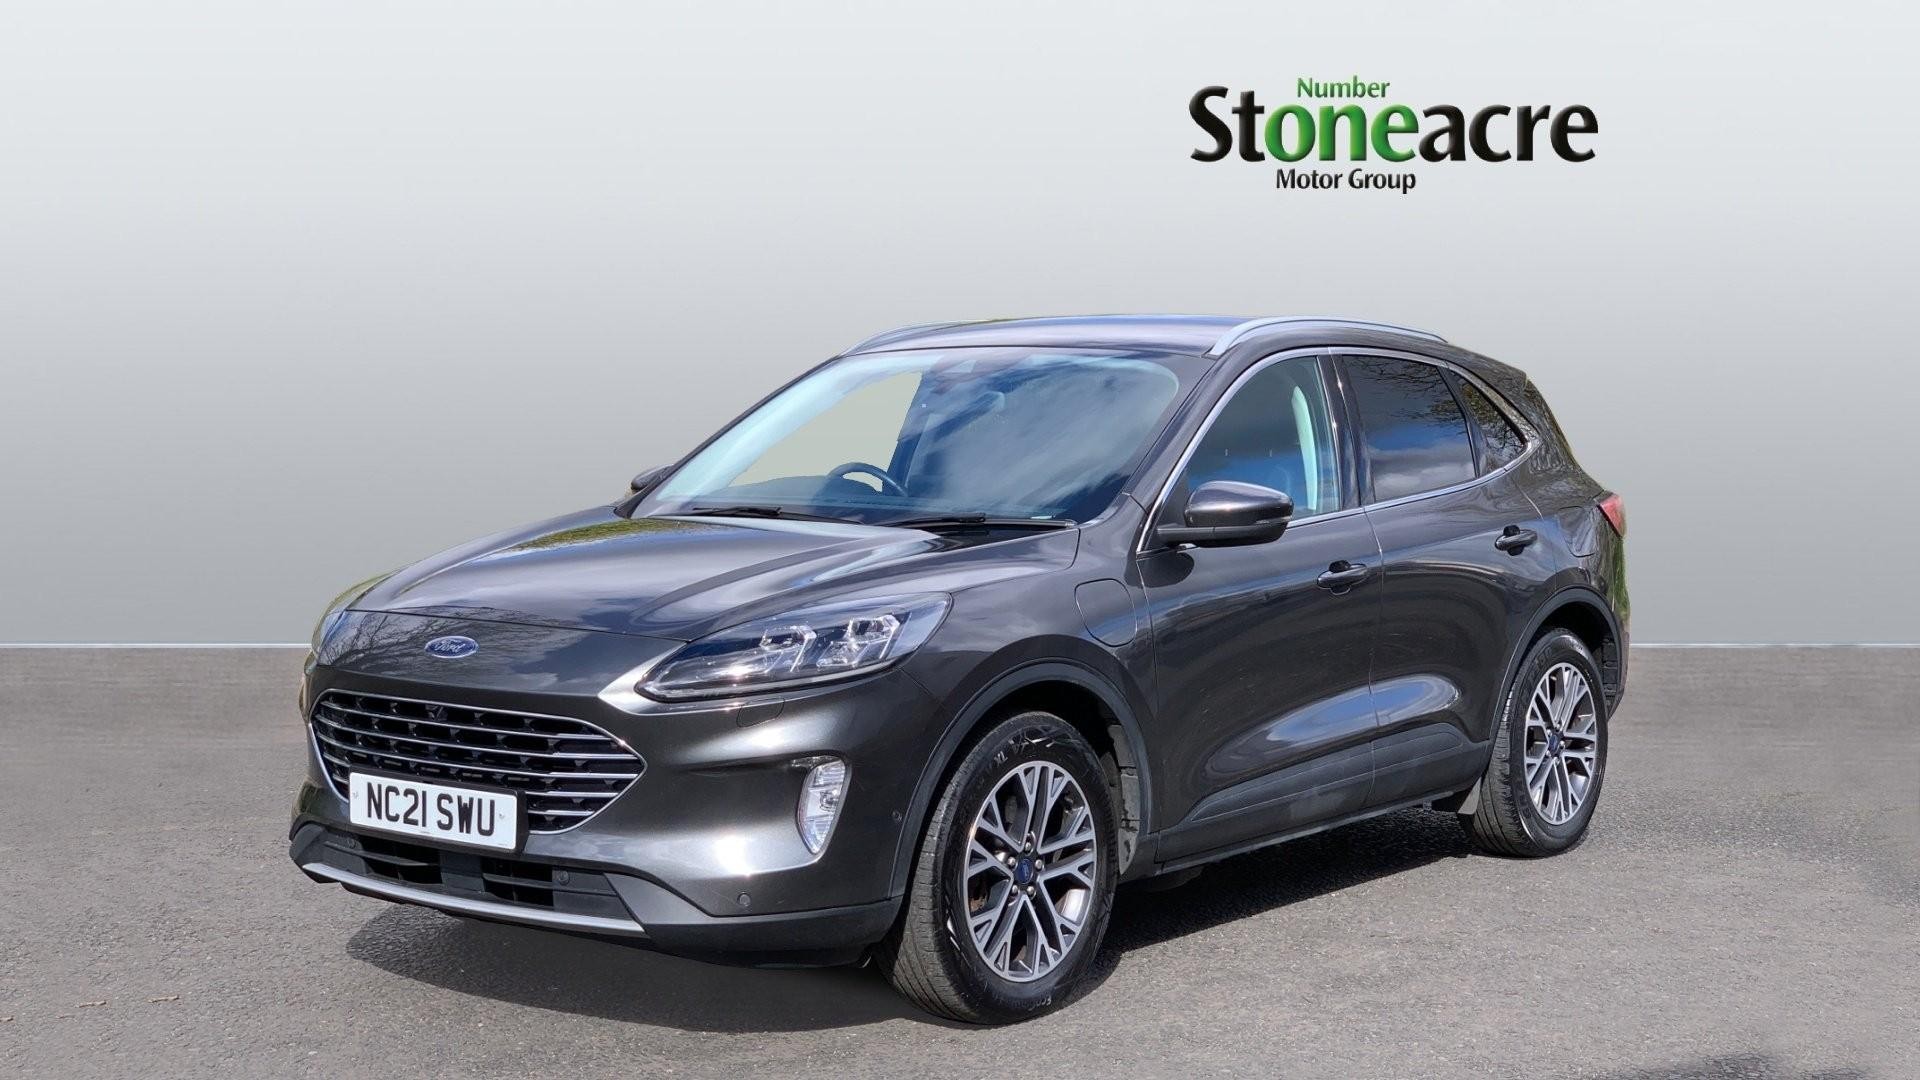 Ford Kuga 2.5 EcoBoost Duratec 14.4kWh Titanium First Edition SUV 5dr Petrol Plug-in Hybrid CVT Euro 6 (s/s) (225 ps) (NC21SWU) image 5